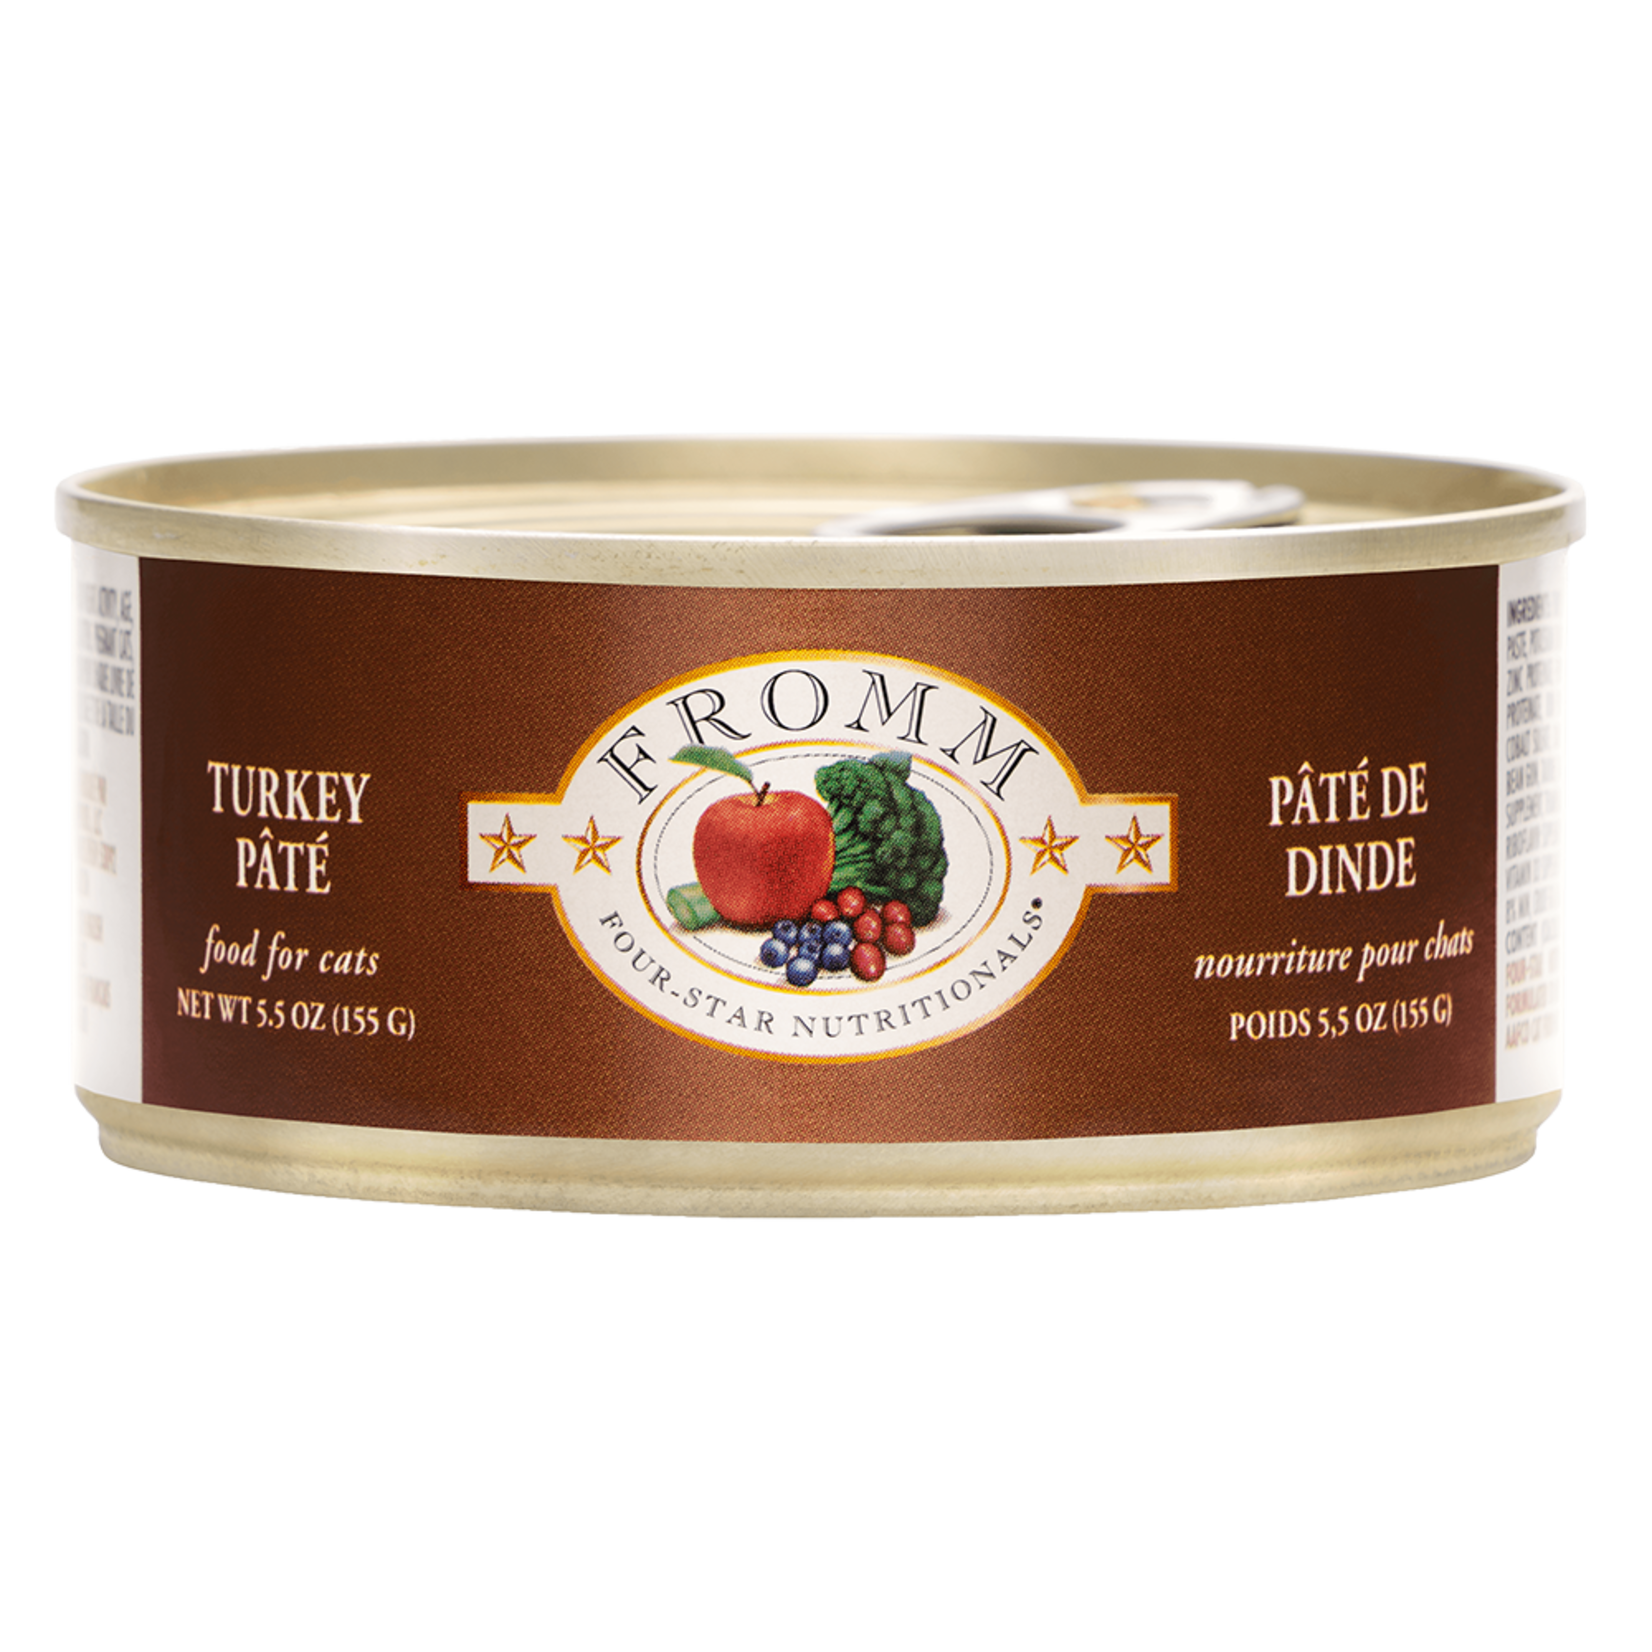 Fromm Family Fromm Turkey Pâté Canned Cat Food 5.5oz